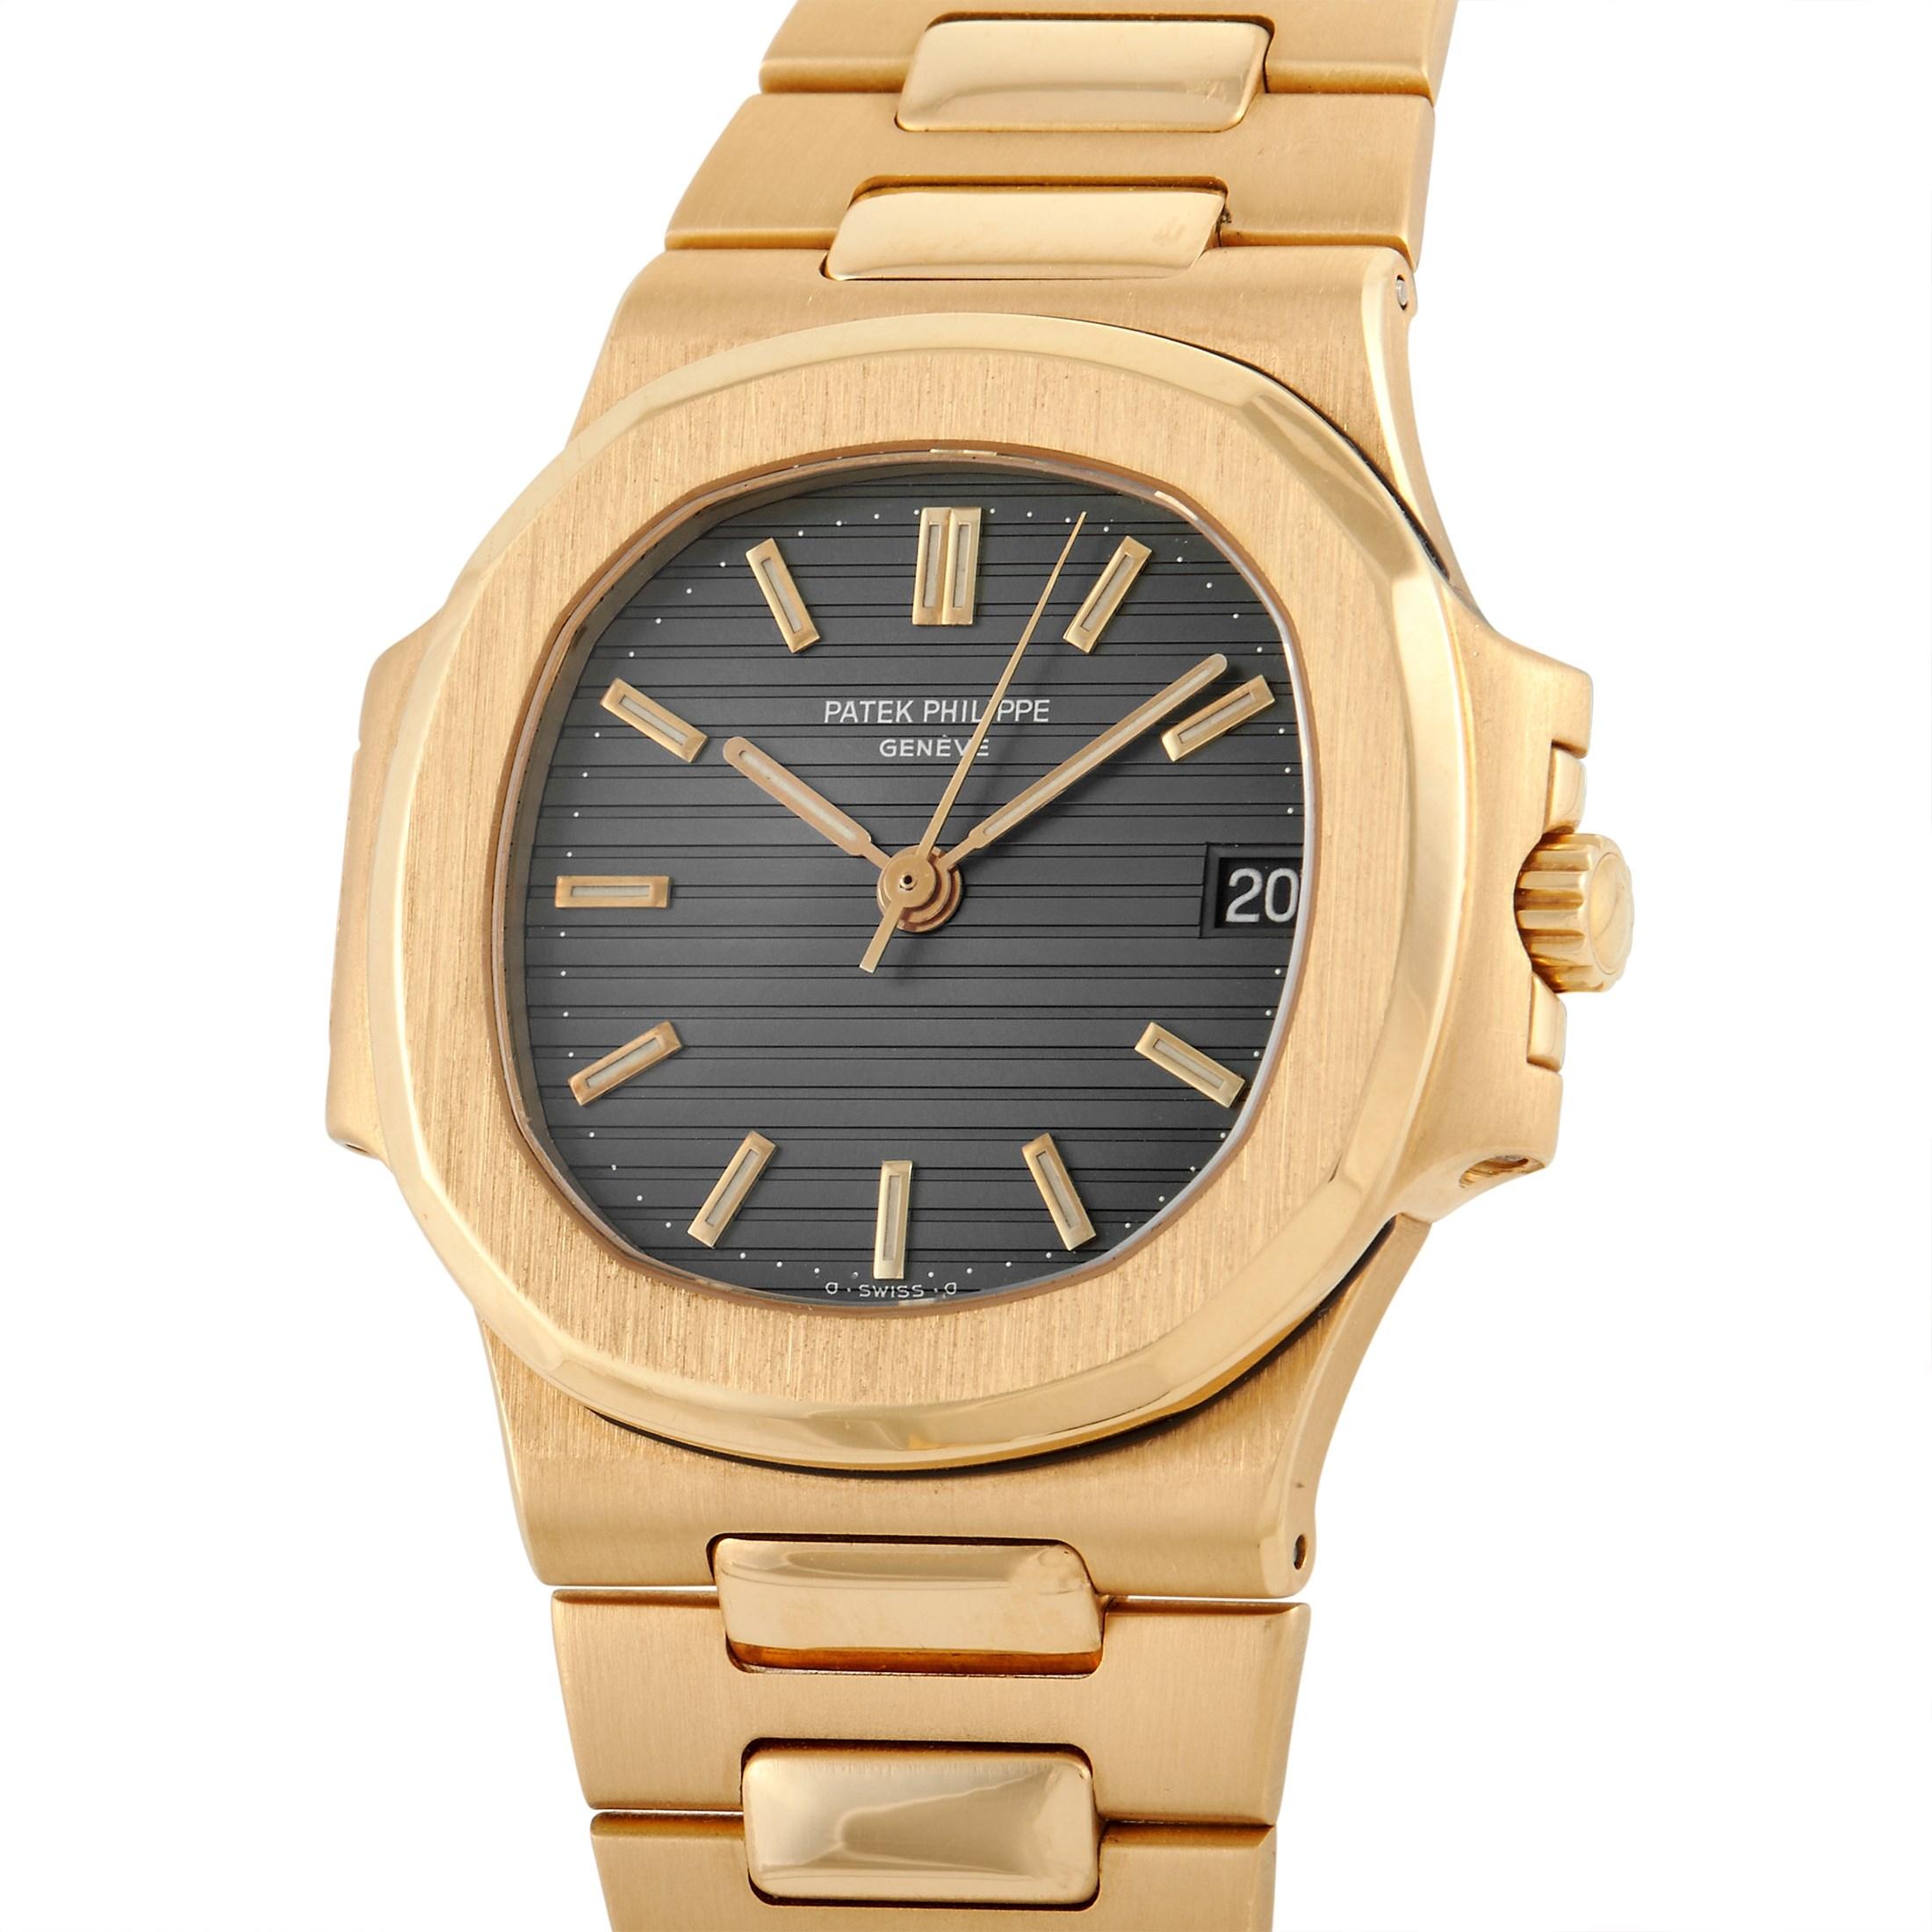 The Patek Philippe Nautilus Watch, reference number 3800J, is a sleek, sophisticated timepiece with an inherent sense of luxury. 

Clean and classic in design, it features a 37mm case, bracelet, and bezel crafted from opulent 18K Yellow Gold. On the